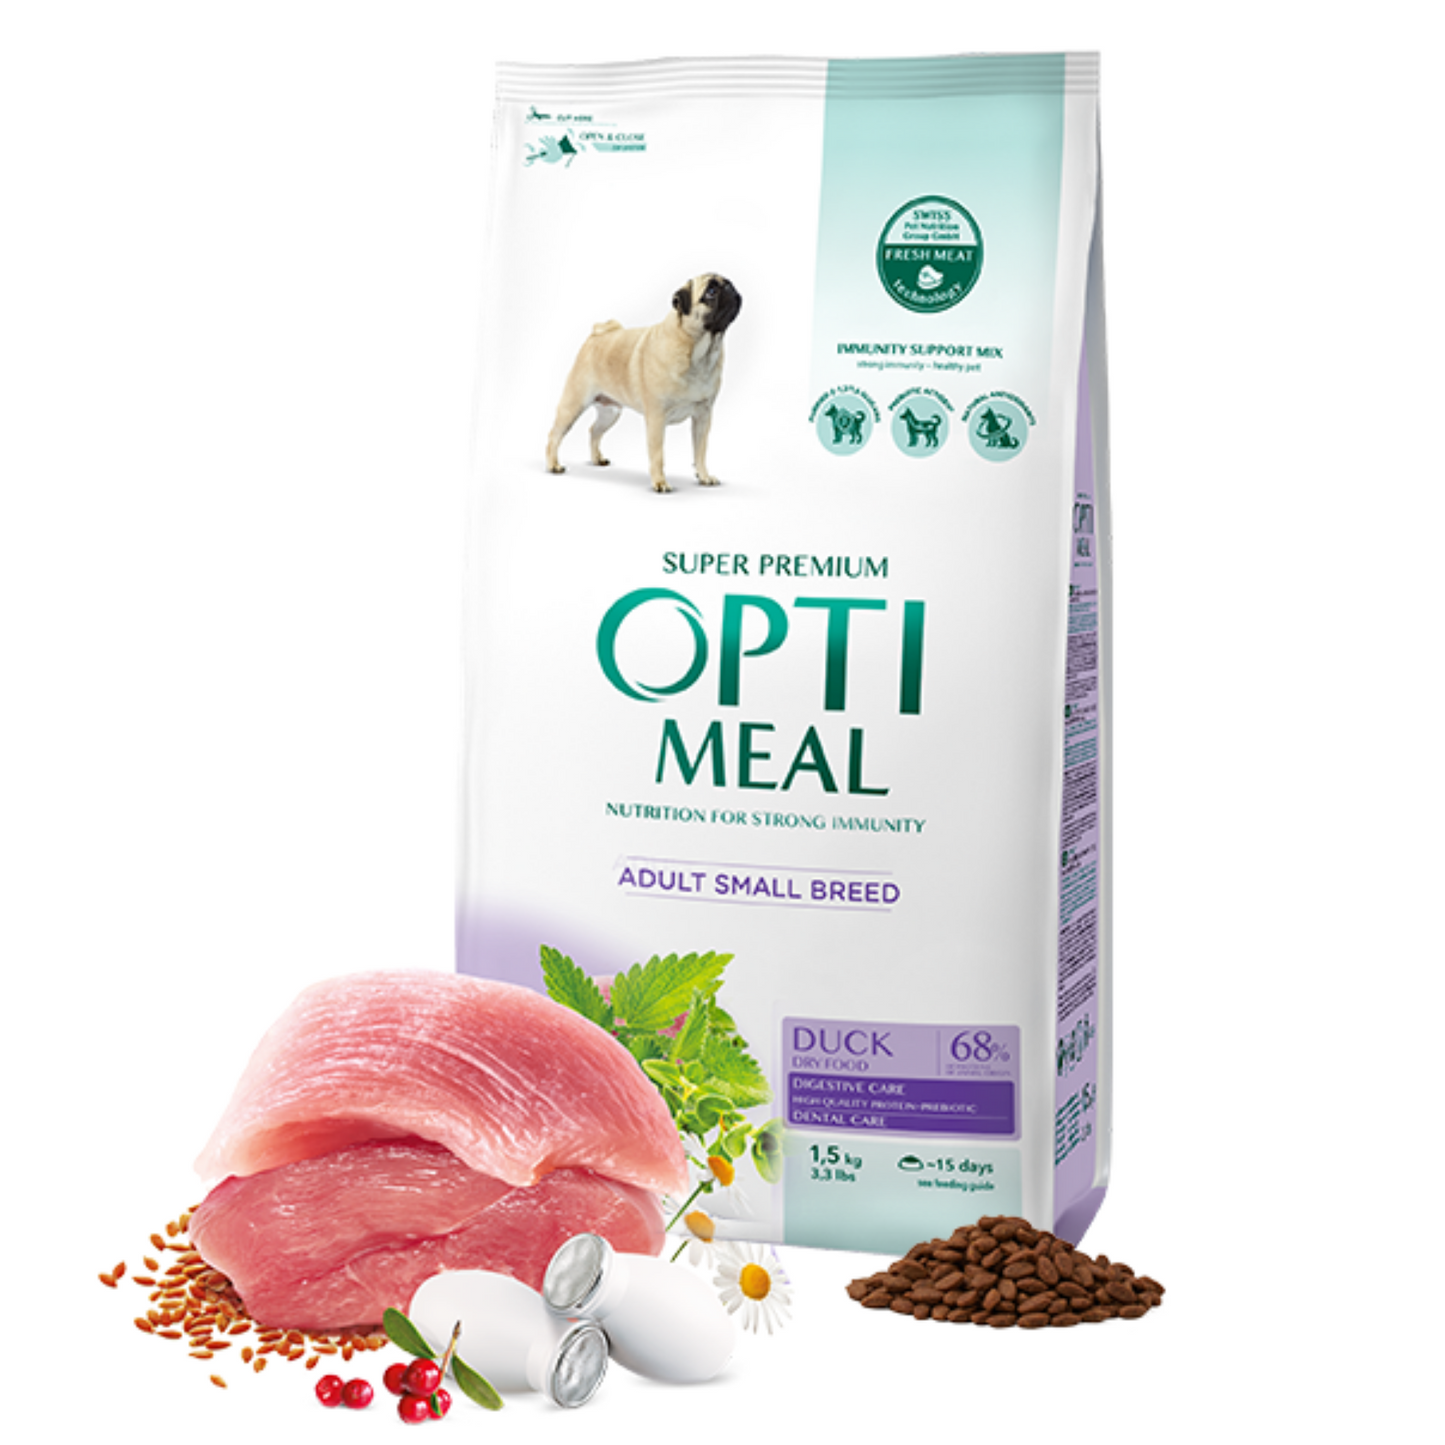 OPTIMEAL Complete Dry Dog Food for Small Breeds with Duck